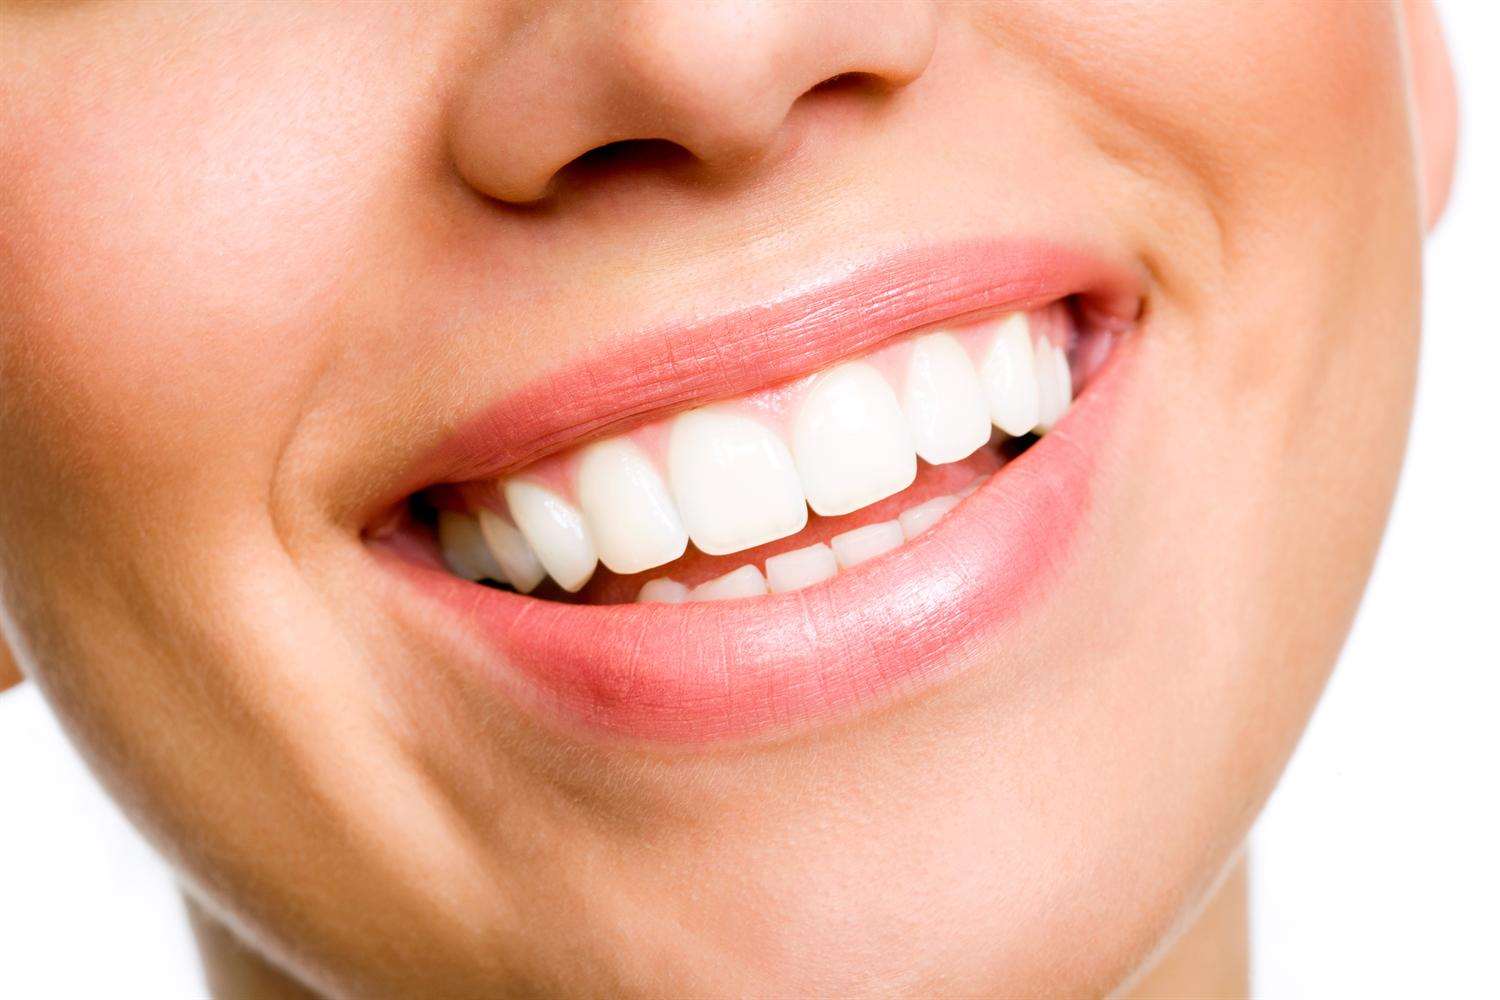 Tooth whitening can only legally be carried out by a registered professional